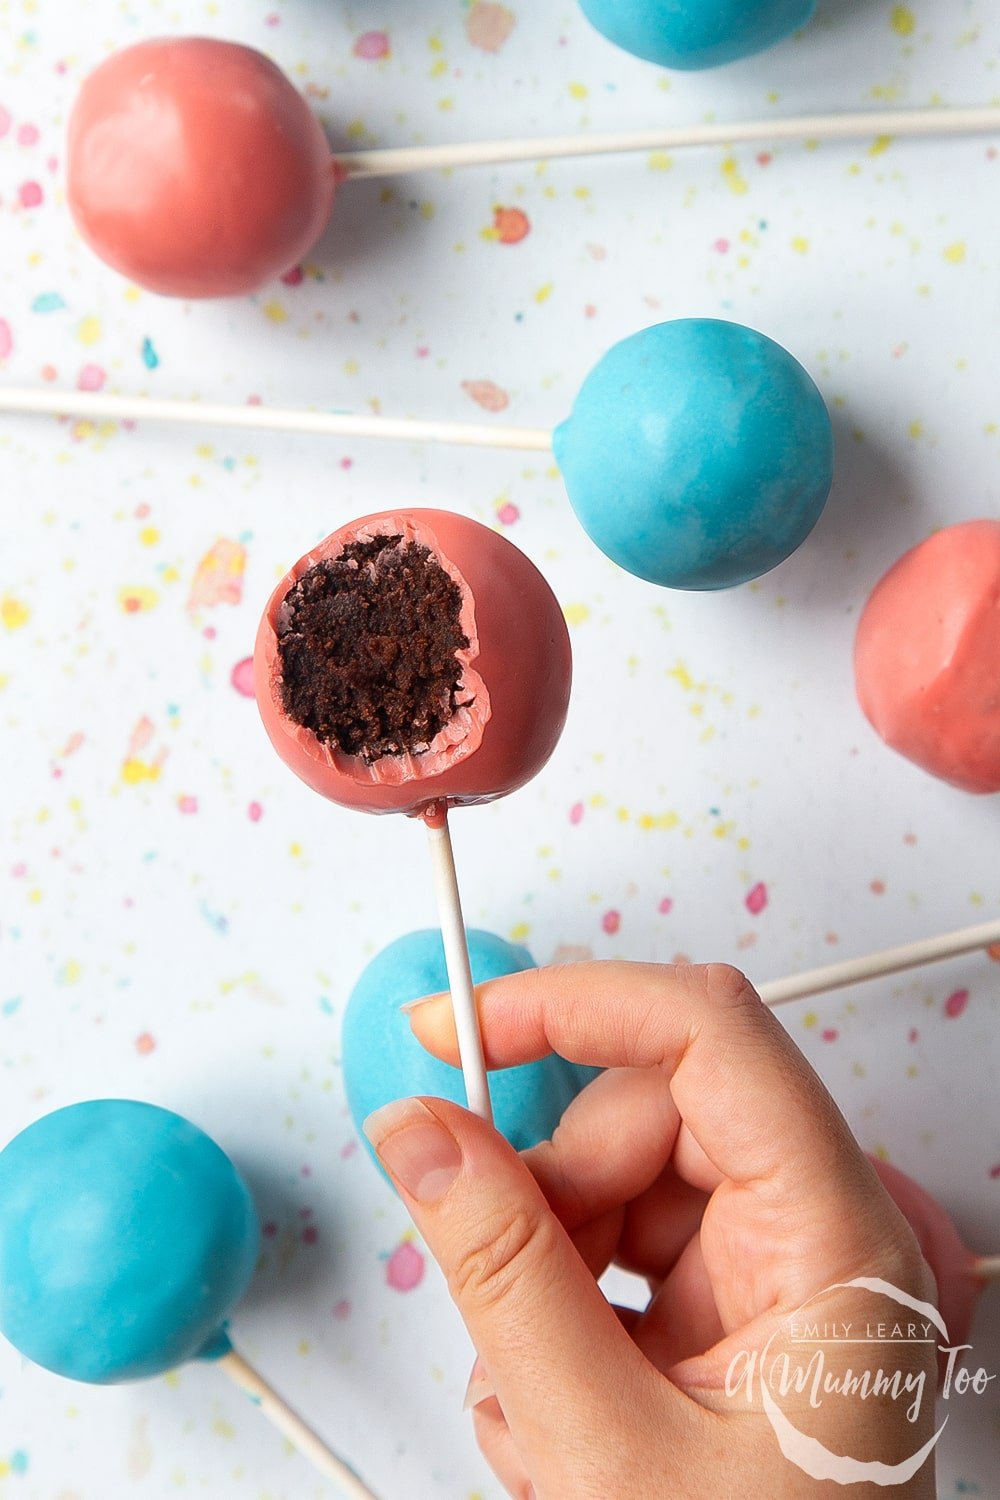 A hand holds a pink cake pop from a cake pop bouquet. It has a bite taken out of it, showing the chocolate sponge filling inside.